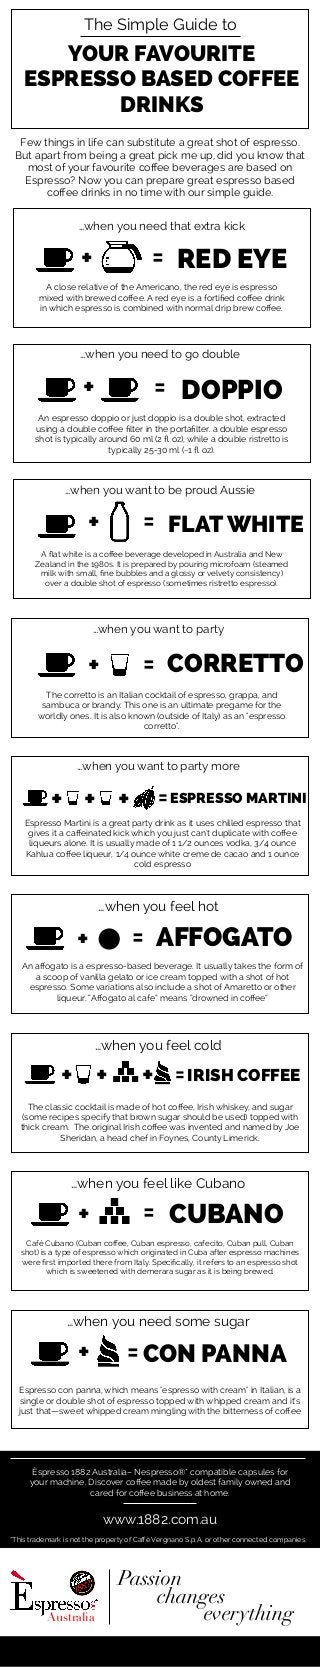 YOUR FAVOURITE
ESPRESSO BASED COFFEE
DRINKS
The Simple Guide to
Few things in life can substitute a great shot of espresso.
But apart from being a great pick me up, did you know that
most of your favourite coﬀee beverages are based on
Espresso? Now you can prepare great espresso based
coﬀee drinks in no time with our simple guide.
…when you need that extra kick
…when you need to go double
…when you want to be proud Aussie
…when you want to party
…when you want to party more
…when you feel hot
…when you feel cold
…when you feel like Cubano
…when you need some sugar
www.1882.com.au
Èspresso 1882 Australia– Nespresso®* compatible capsules for
your machine. Discover coﬀee made by oldest family owned and
cared for coﬀee business at home.
*This trademark is not the property of Caﬀè Vergnano S.p.A. or other connected companies.
Australia
Passion
changes
everything
+ = RED EYE
A close relative of the Americano, the red eye is espresso
mixed with brewed coﬀee. A red eye is a fortiﬁed coﬀee drink
in which espresso is combined with normal drip brew coﬀee.
+ = DOPPIO
An espresso doppio or just doppio is a double shot, extracted
using a double coﬀee ﬁlter in the portaﬁlter. a double espresso
shot is typically around 60 ml (2 ﬂ oz), while a double ristretto is
typically 25-30 ml (~1 ﬂ oz).
+ = FLAT WHITE
A ﬂat white is a coﬀee beverage developed in Australia and New
Zealand in the 1980s. It is prepared by pouring microfoam (steamed
milk with small, ﬁne bubbles and a glossy or velvety consistency)
over a double shot of espresso (sometimes ristretto espresso).
+ = CORRETTO
The corretto is an Italian cocktail of espresso, grappa, and
sambuca or brandy. This one is an ultimate pregame for the
worldly ones. It is also known (outside of Italy) as an "espresso
corretto".
+ + + =ESPRESSO MARTINI
Espresso Martini is a great party drink as it uses chilled espresso that
gives it a caﬀeinated kick which you just can't duplicate with coﬀee
liqueurs alone. It is usually made of 1 1/2 ounces vodka, 3/4 ounce
Kahlua coﬀee liqueur, 1/4 ounce white creme de cacao and 1 ounce
cold espresso
+ = AFFOGATO
An aﬀogato is a espresso-based beverage. It usually takes the form of
a scoop of vanilla gelato or ice cream topped with a shot of hot
espresso. Some variations also include a shot of Amaretto or other
liqueur. “Aﬀogato al cafe” means “drowned in coﬀee”
The classic cocktail is made of hot coﬀee, Irish whiskey, and sugar
(some recipes specify that brown sugar should be used) topped with
thick cream. The original Irish coﬀee was invented and named by Joe
Sheridan, a head chef in Foynes, County Limerick.
+ + + =IRISH COFFEE
+ = CUBANO
Café Cubano (Cuban coﬀee, Cuban espresso, cafecito, Cuban pull, Cuban
shot) is a type of espresso which originated in Cuba after espresso machines
were ﬁrst imported there from Italy. Speciﬁcally, it refers to an espresso shot
which is sweetened with demerara sugar as it is being brewed.
+ =CON PANNA
Espresso con panna, which means "espresso with cream" in Italian, is a
single or double shot of espresso topped with whipped cream and it’s
just that—sweet whipped cream mingling with the bitterness of coﬀee
 